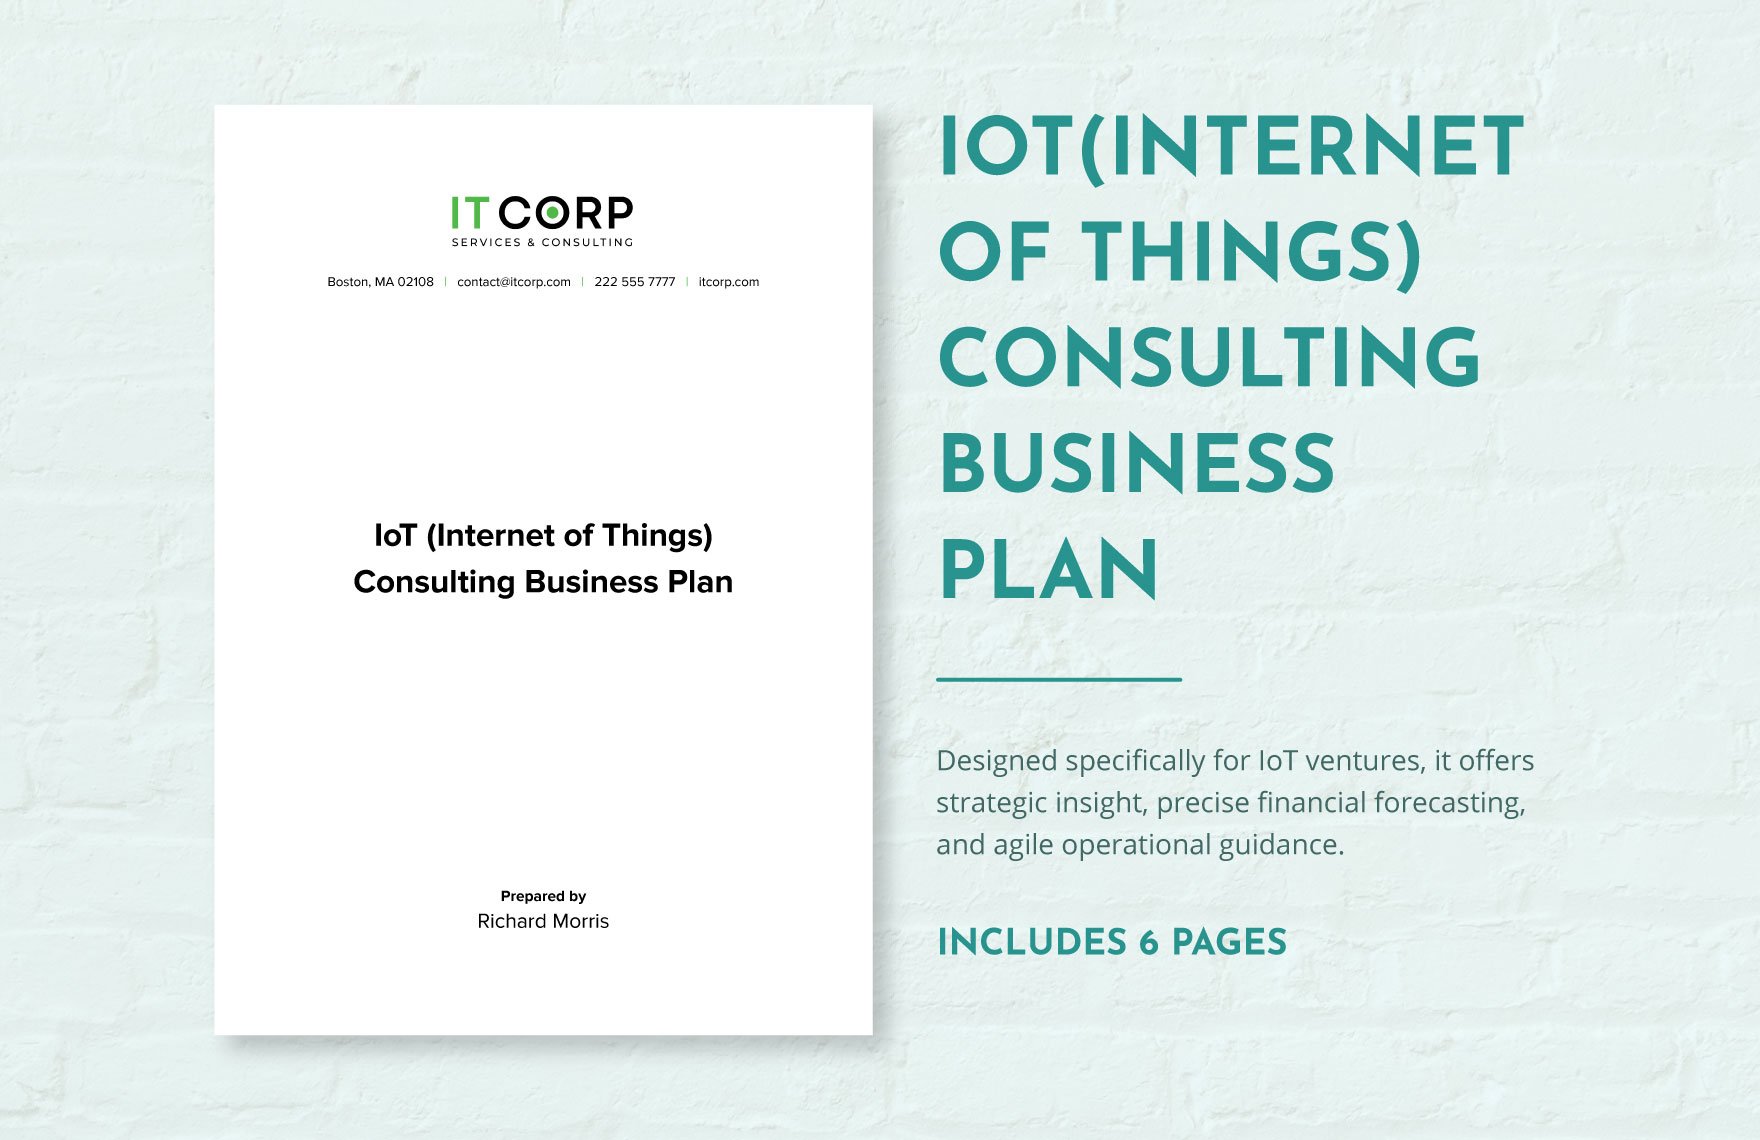 IoT (Internet of Things) Consulting Business Plan Template